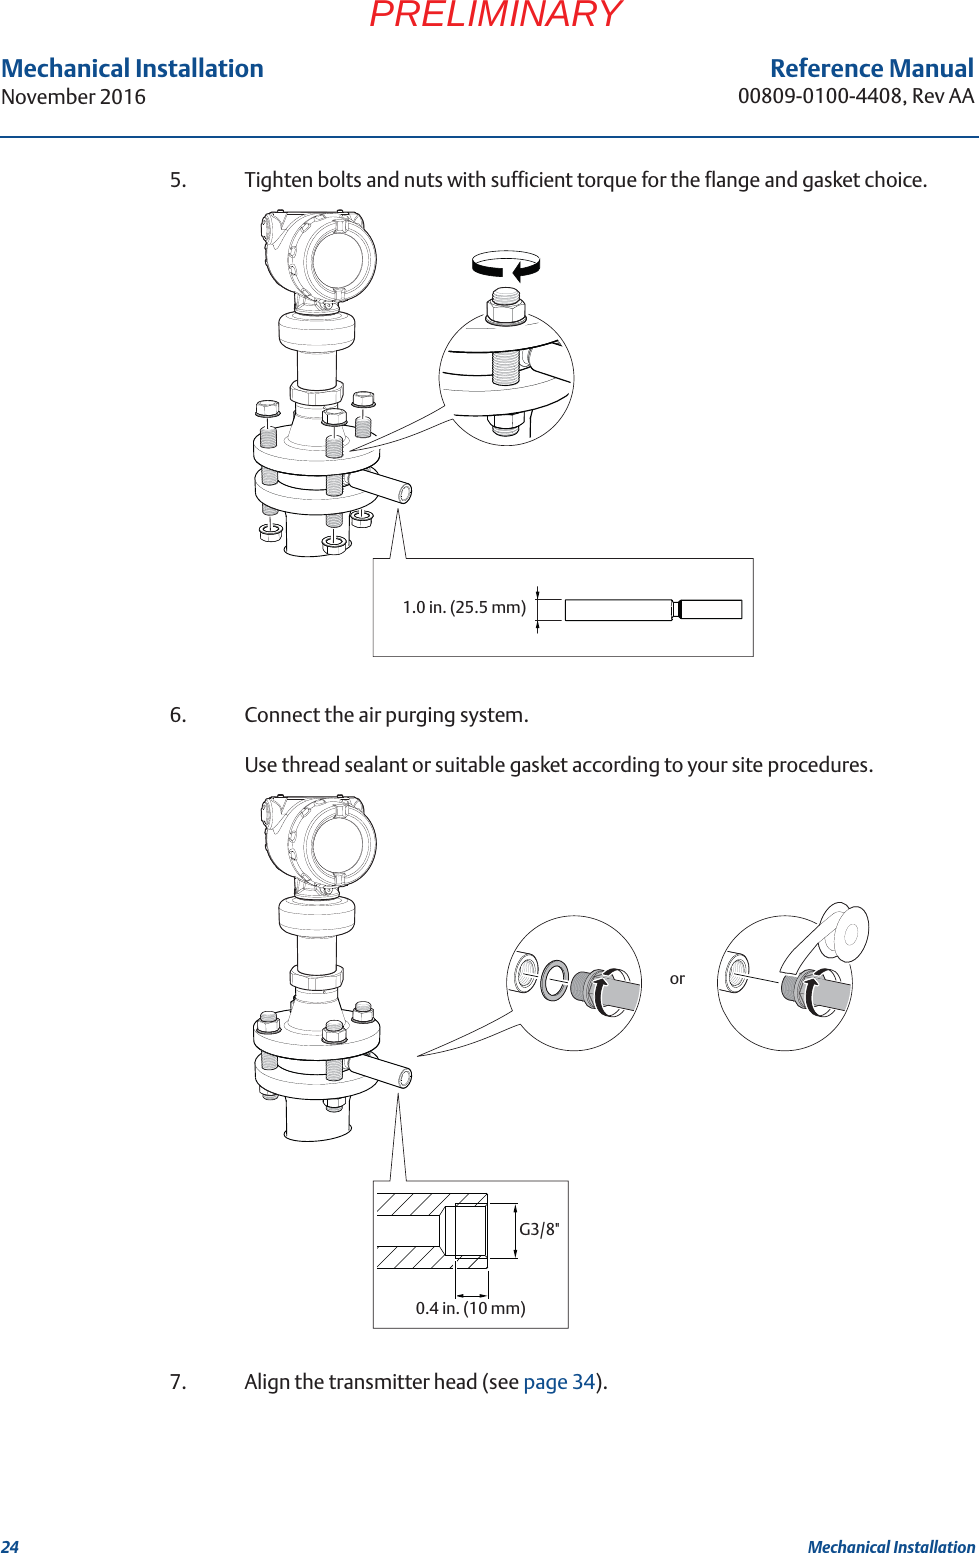 24Reference Manual00809-0100-4408, Rev AAMechanical InstallationNovember 2016Mechanical InstallationPRELIMINARY5. Tighten bolts and nuts with sufficient torque for the flange and gasket choice.6. Connect the air purging system.Use thread sealant or suitable gasket according to your site procedures.7. Align the transmitter head (see page 34).1.0 in. (25.5 mm)G3/8&quot;0.4 in. (10 mm)or